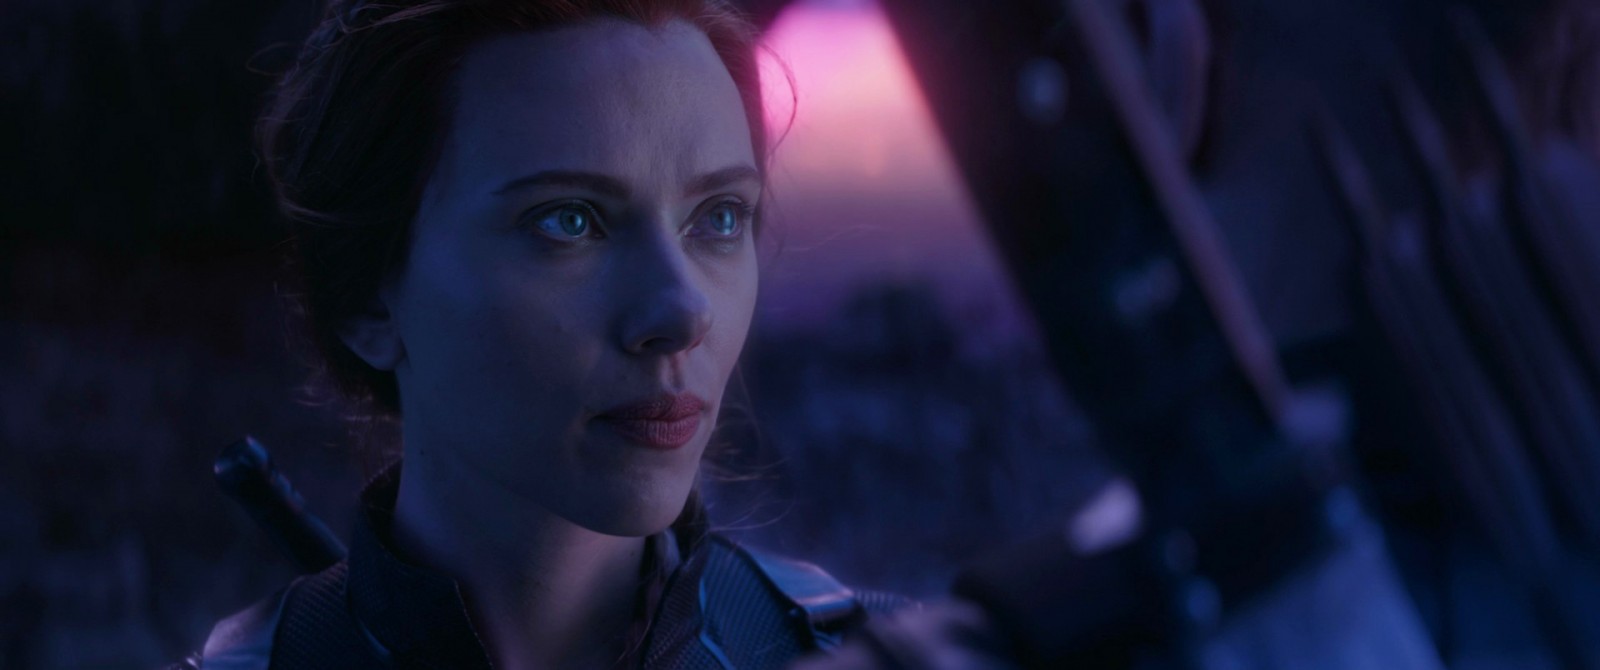 This Avengers Endgame Theory Will Make Its Ending More Depressing 1